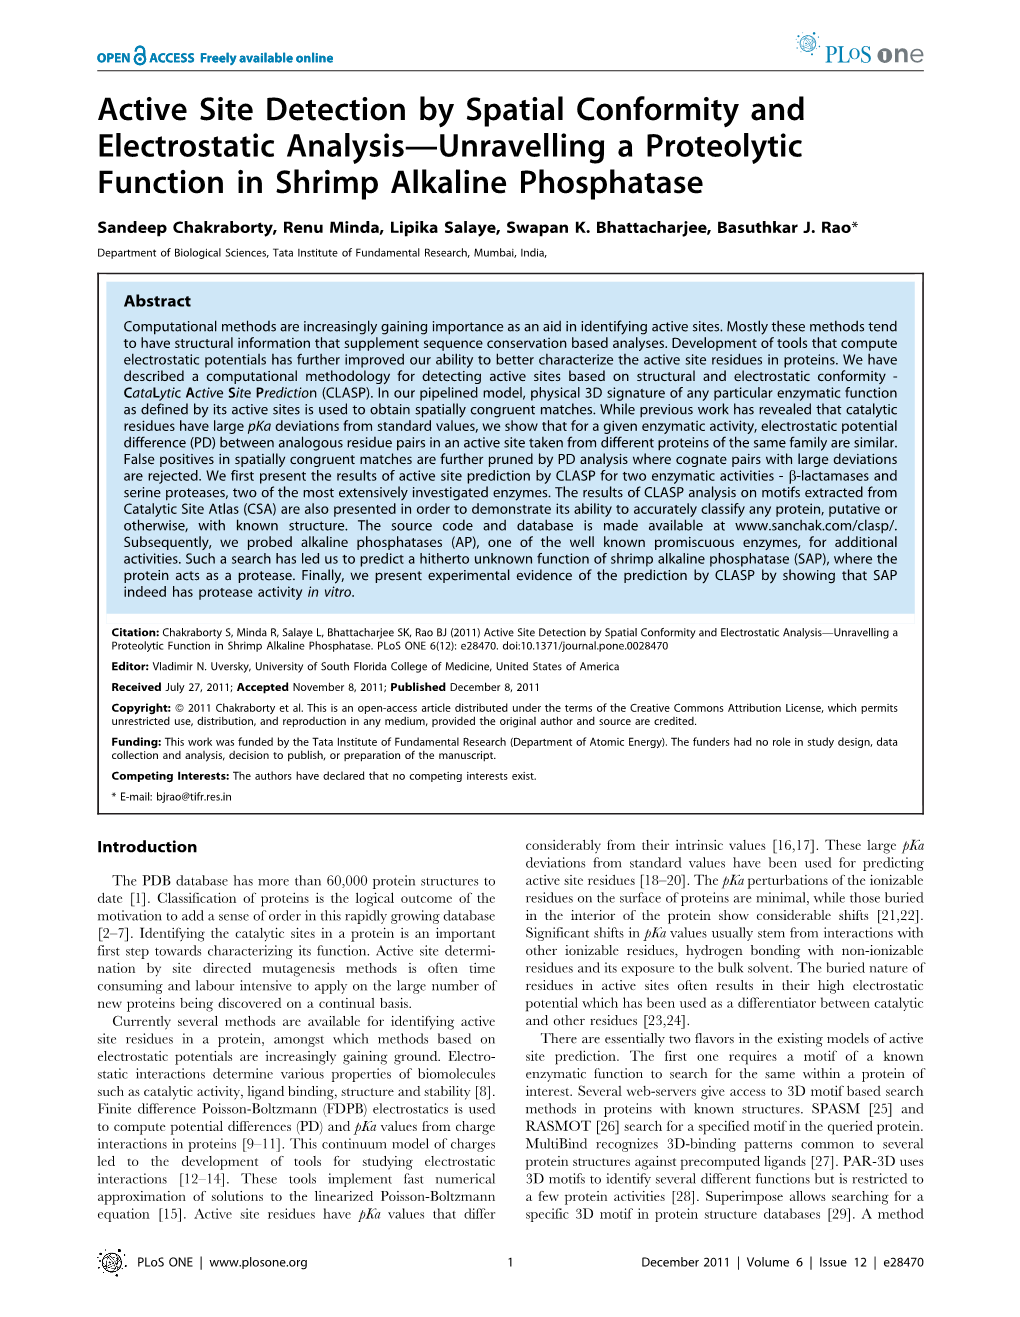 Active Site Detection by Spatial Conformity and Electrostatic Analysis—Unravelling a Proteolytic Function in Shrimp Alkaline Phosphatase